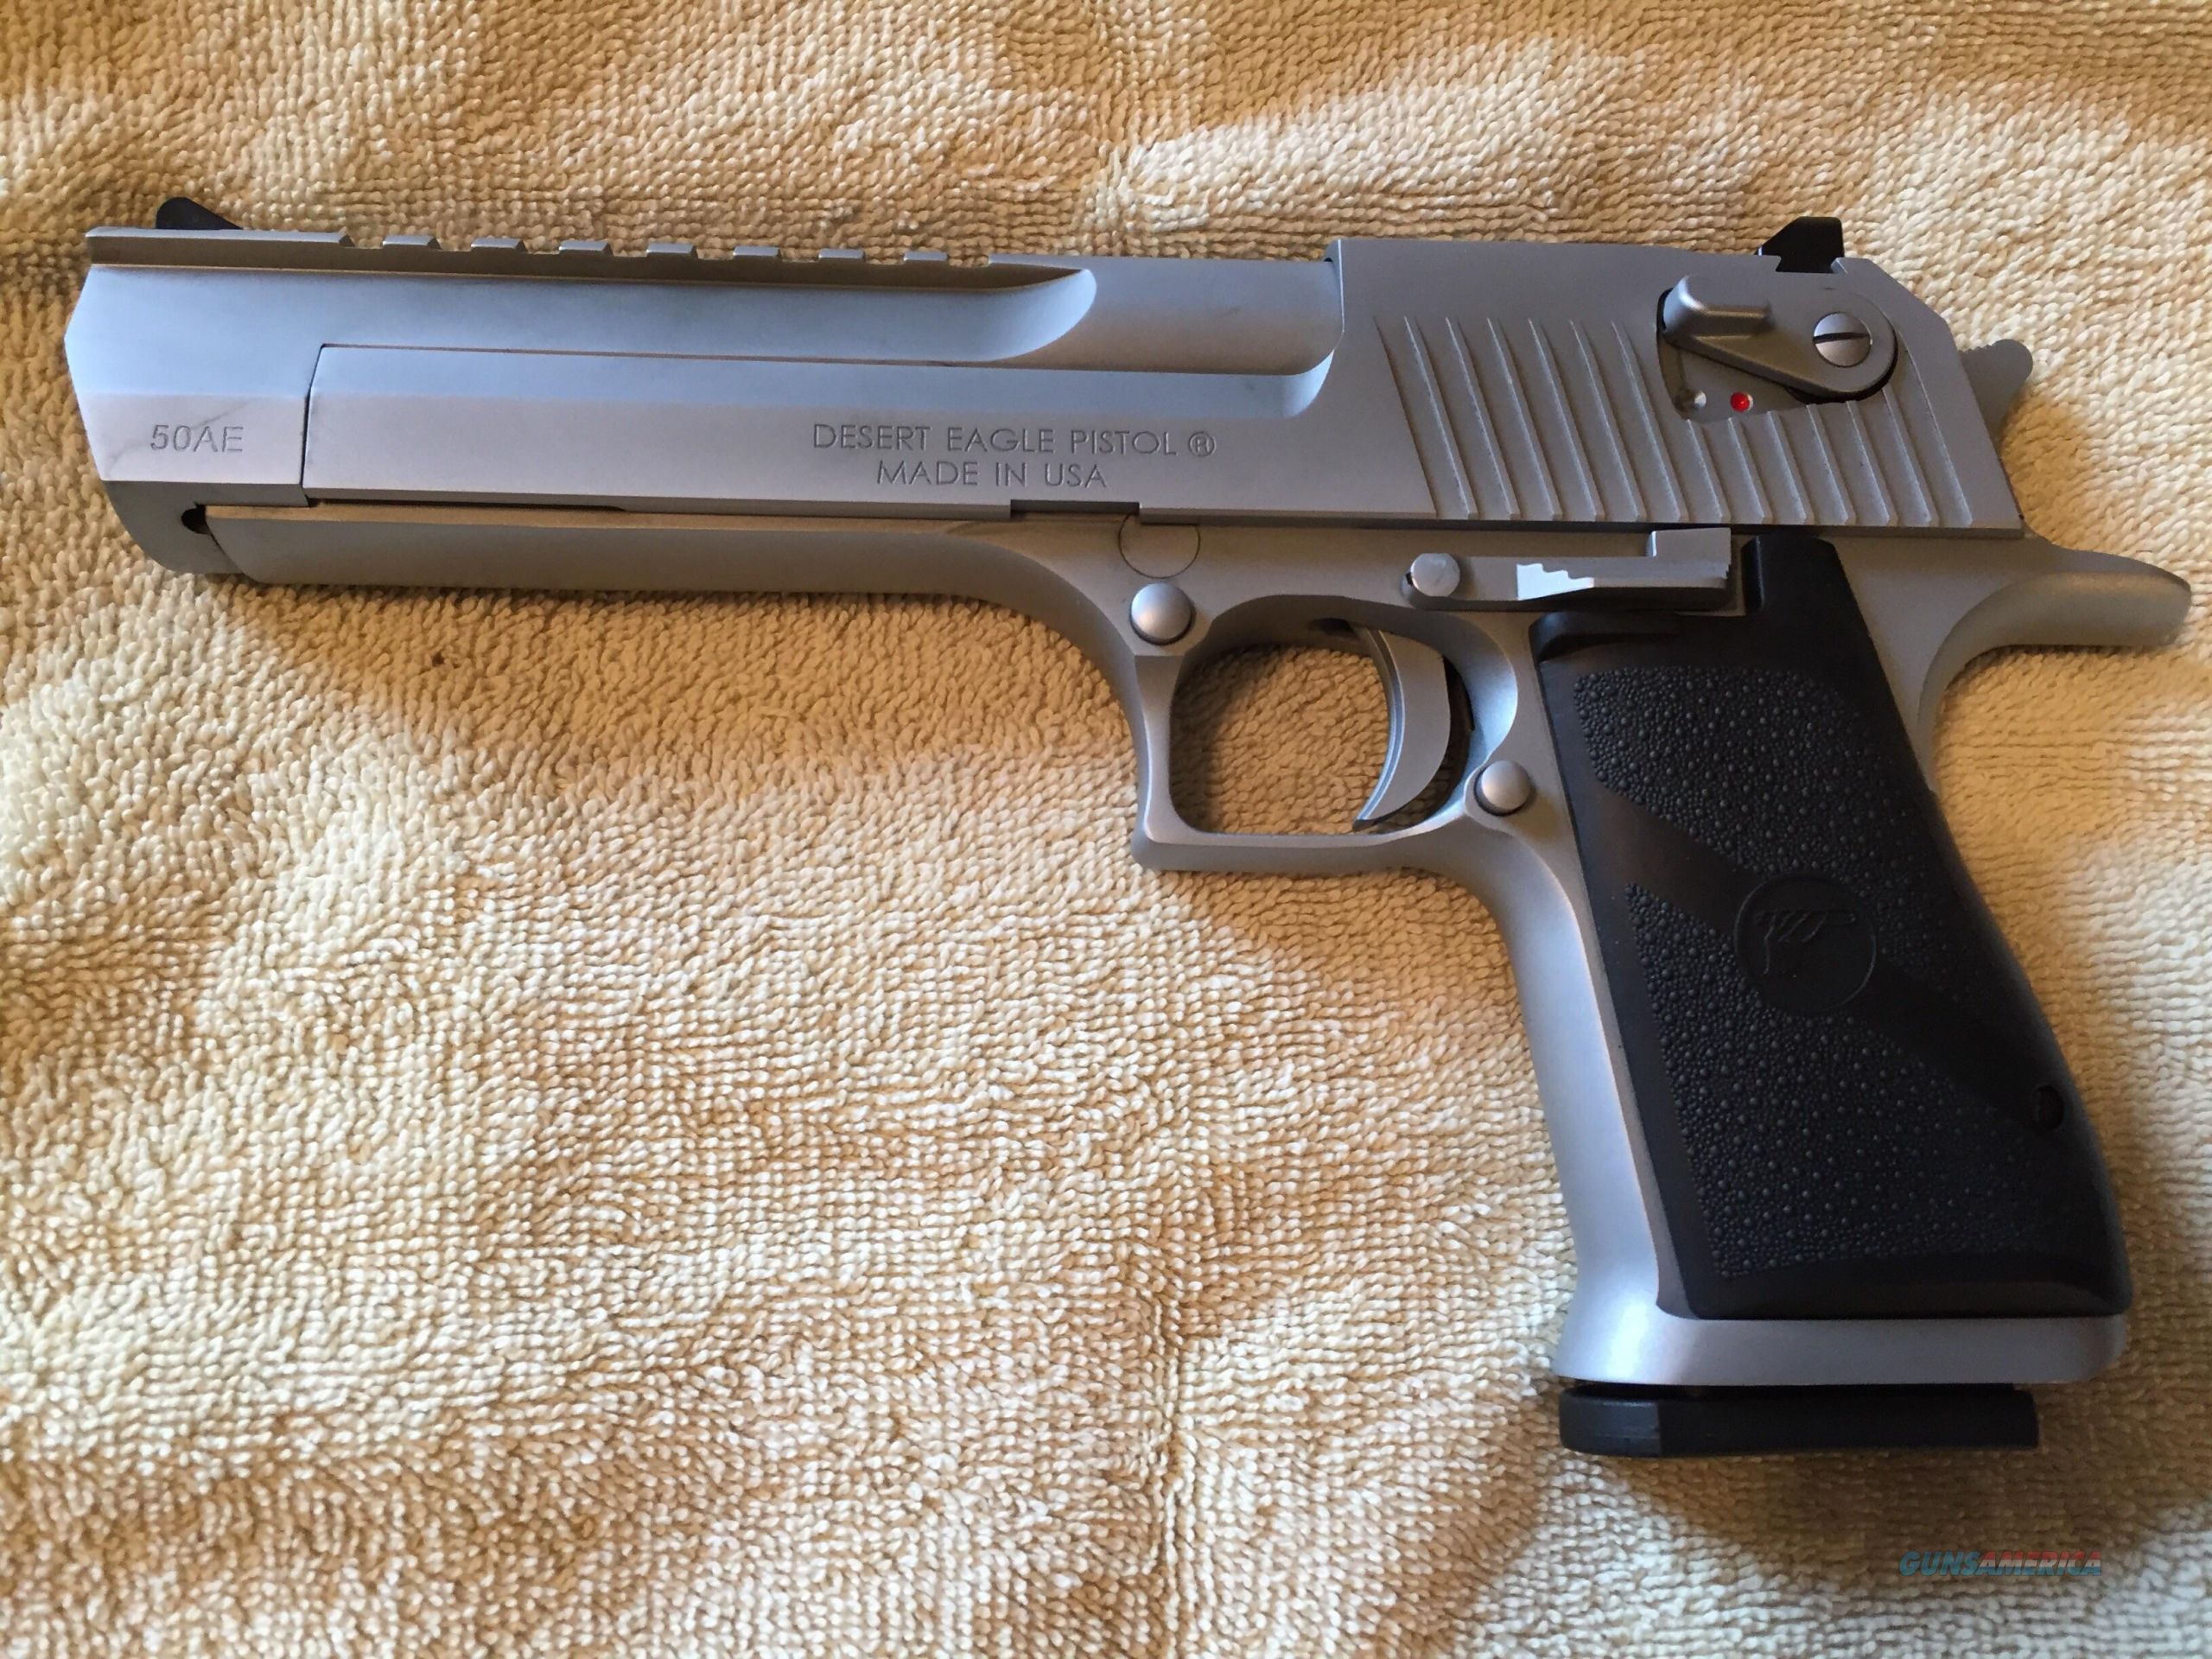 Buy Dessert Eagle Awesome Desert Eagle 50ae Preowned Satin Nickle W 50 Rd for Sale